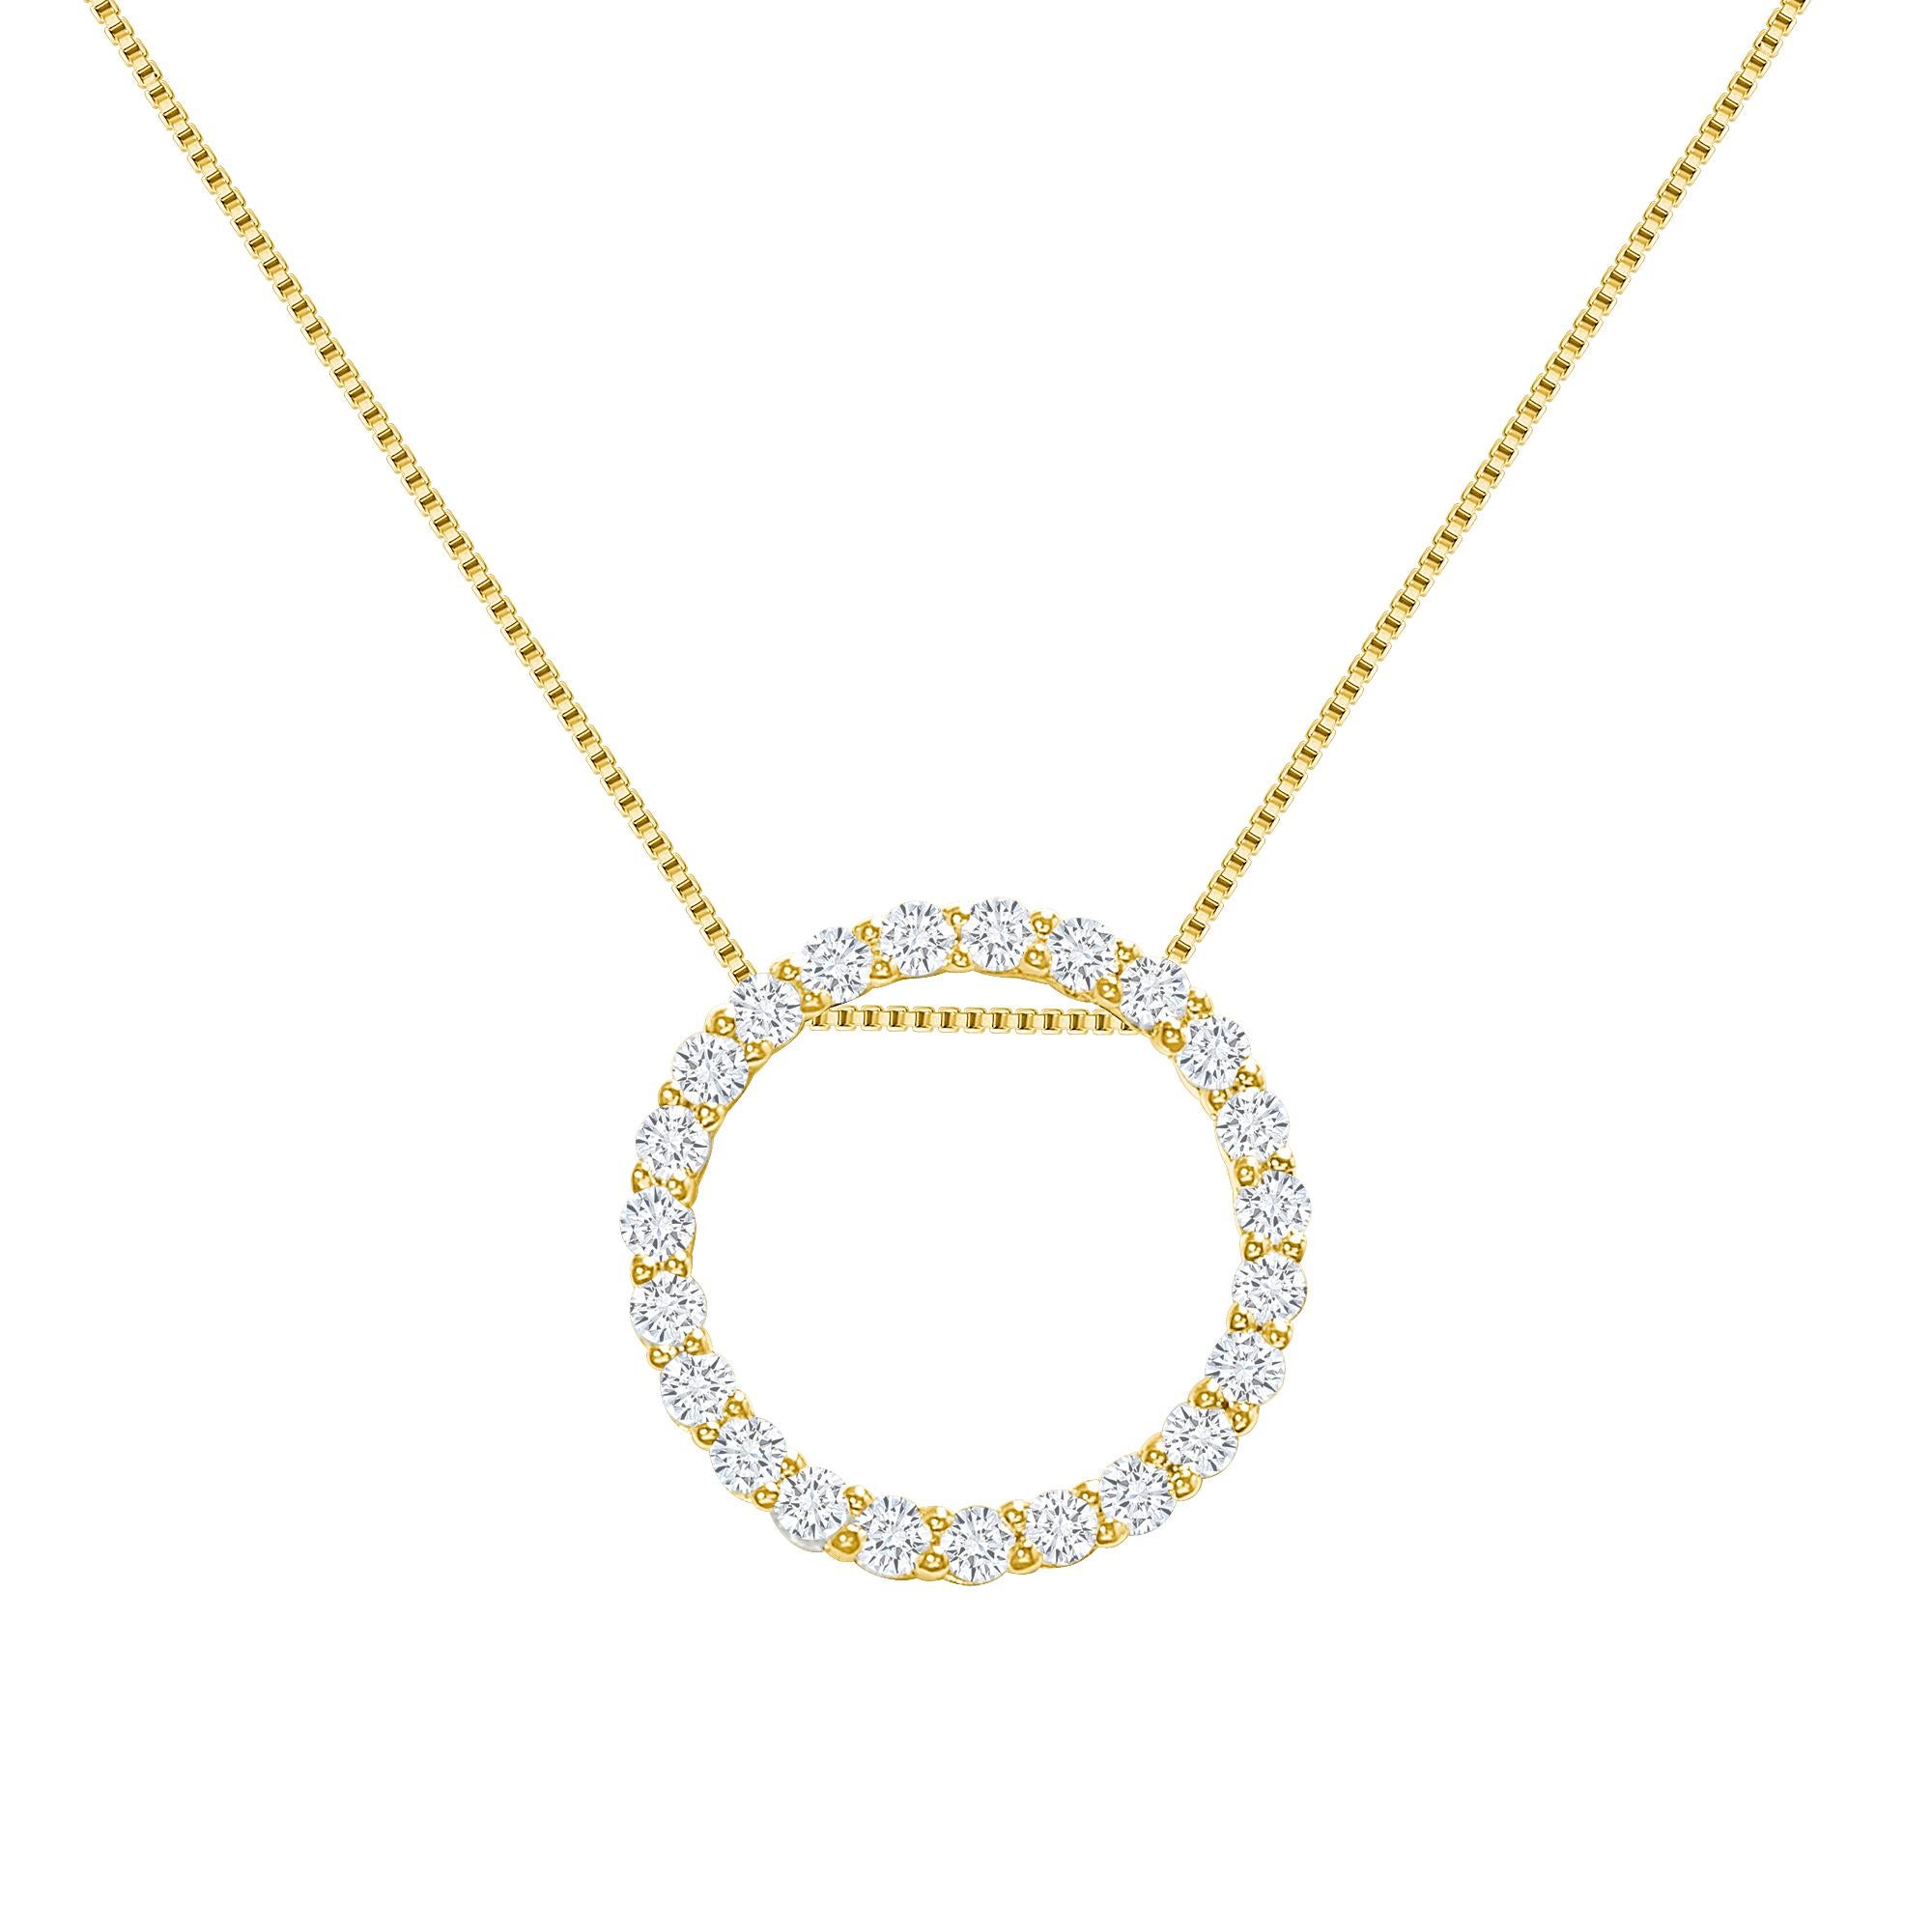 This diamond circle pendant provides a glowing chic look.
Metal: 14k Gold
Diamond Total Carats: 1 carat
Diamond Cut: Round Natural Diamonds (Not Lab Grown)
Diamond Clarity: VS
Diamond Color: F-G
Color: Yellow Gold
Necklace Length: 18 inches